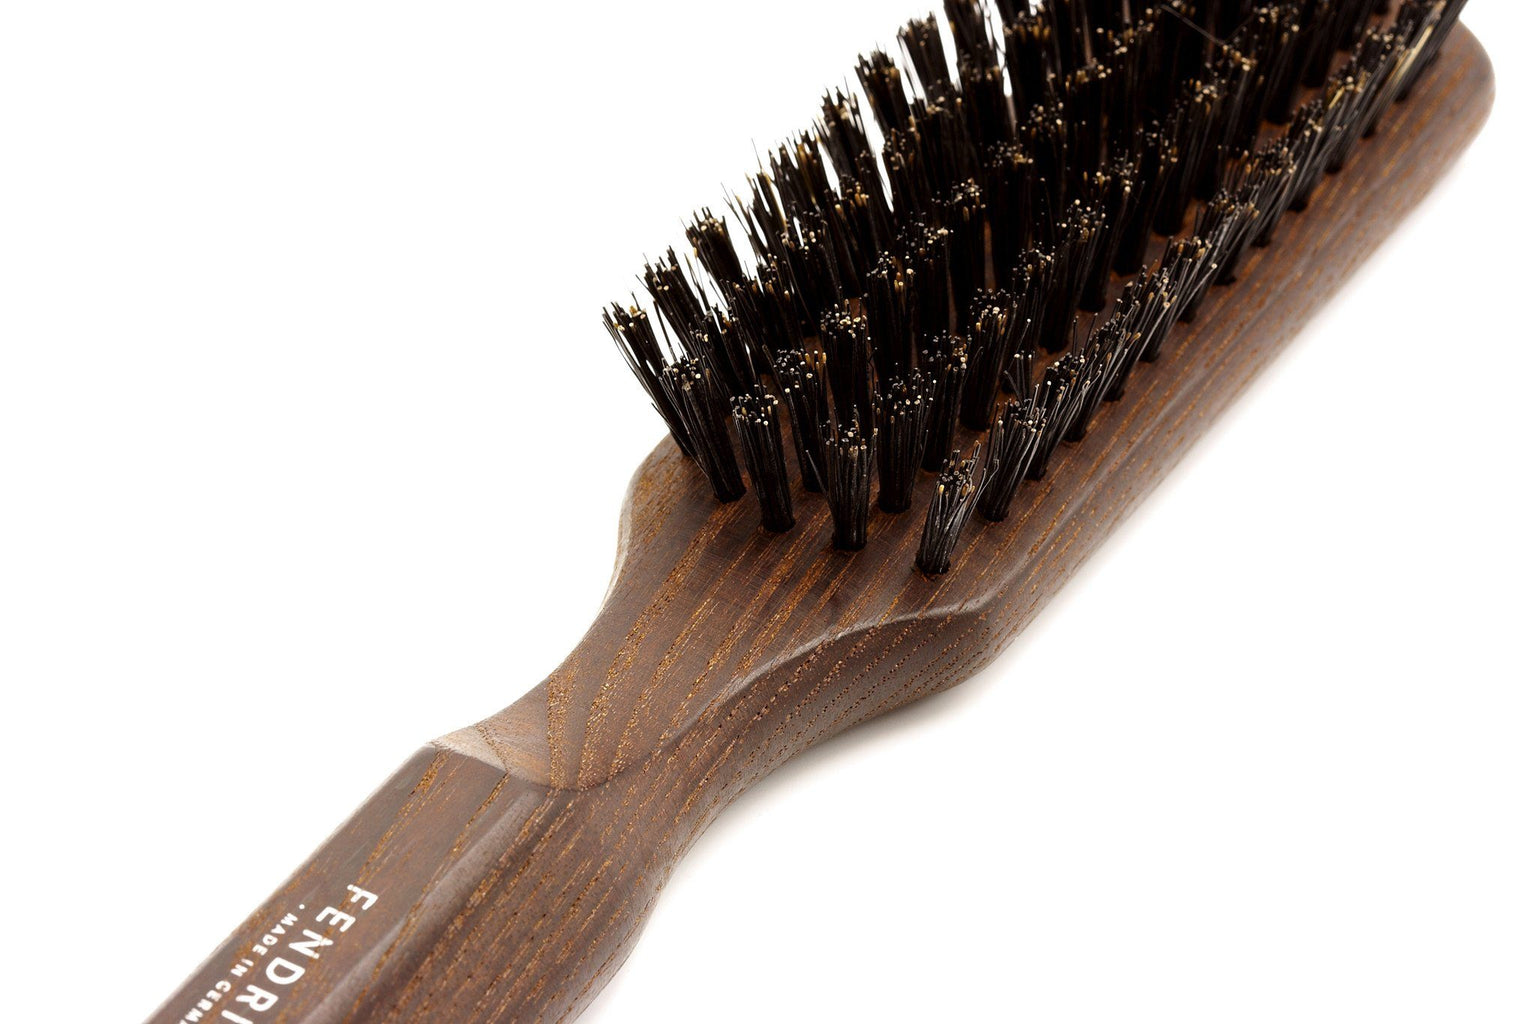 5 Row Thermowood Ash Hairbrush with Boar Bristles - Made in Germany Hair Brush Fendrihan 